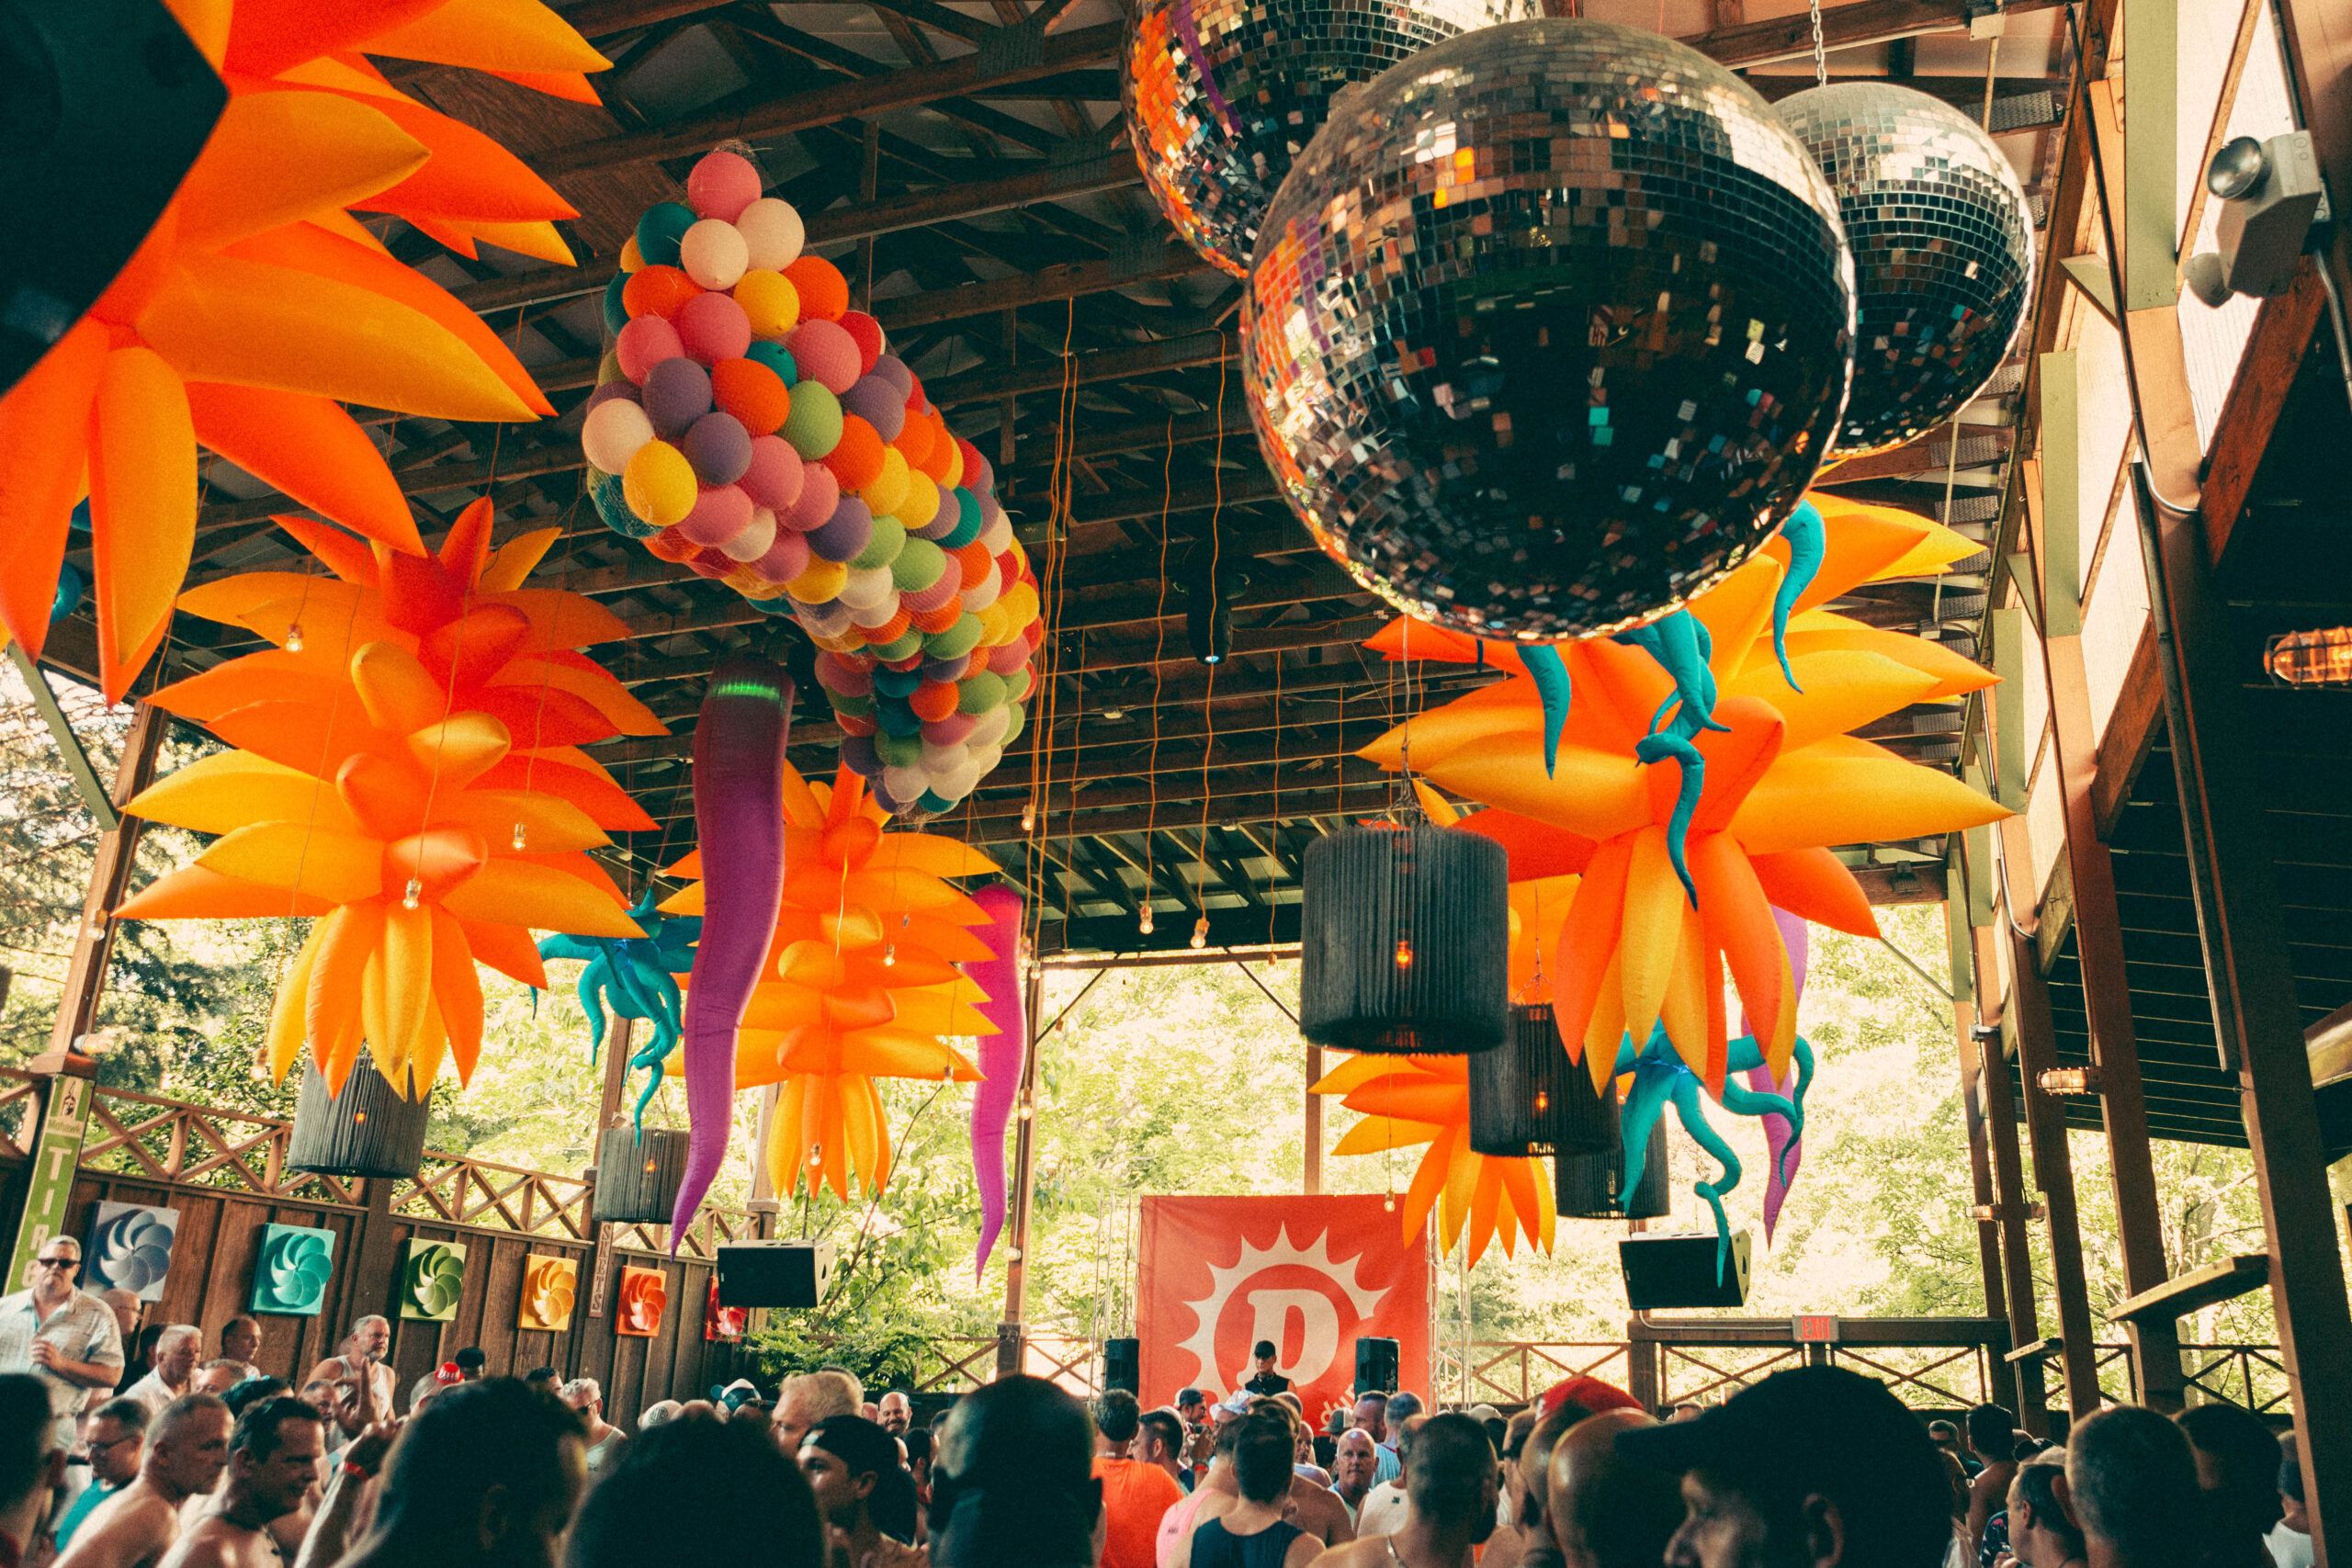 Crowd of people in a room with balloons and disco balls overhead